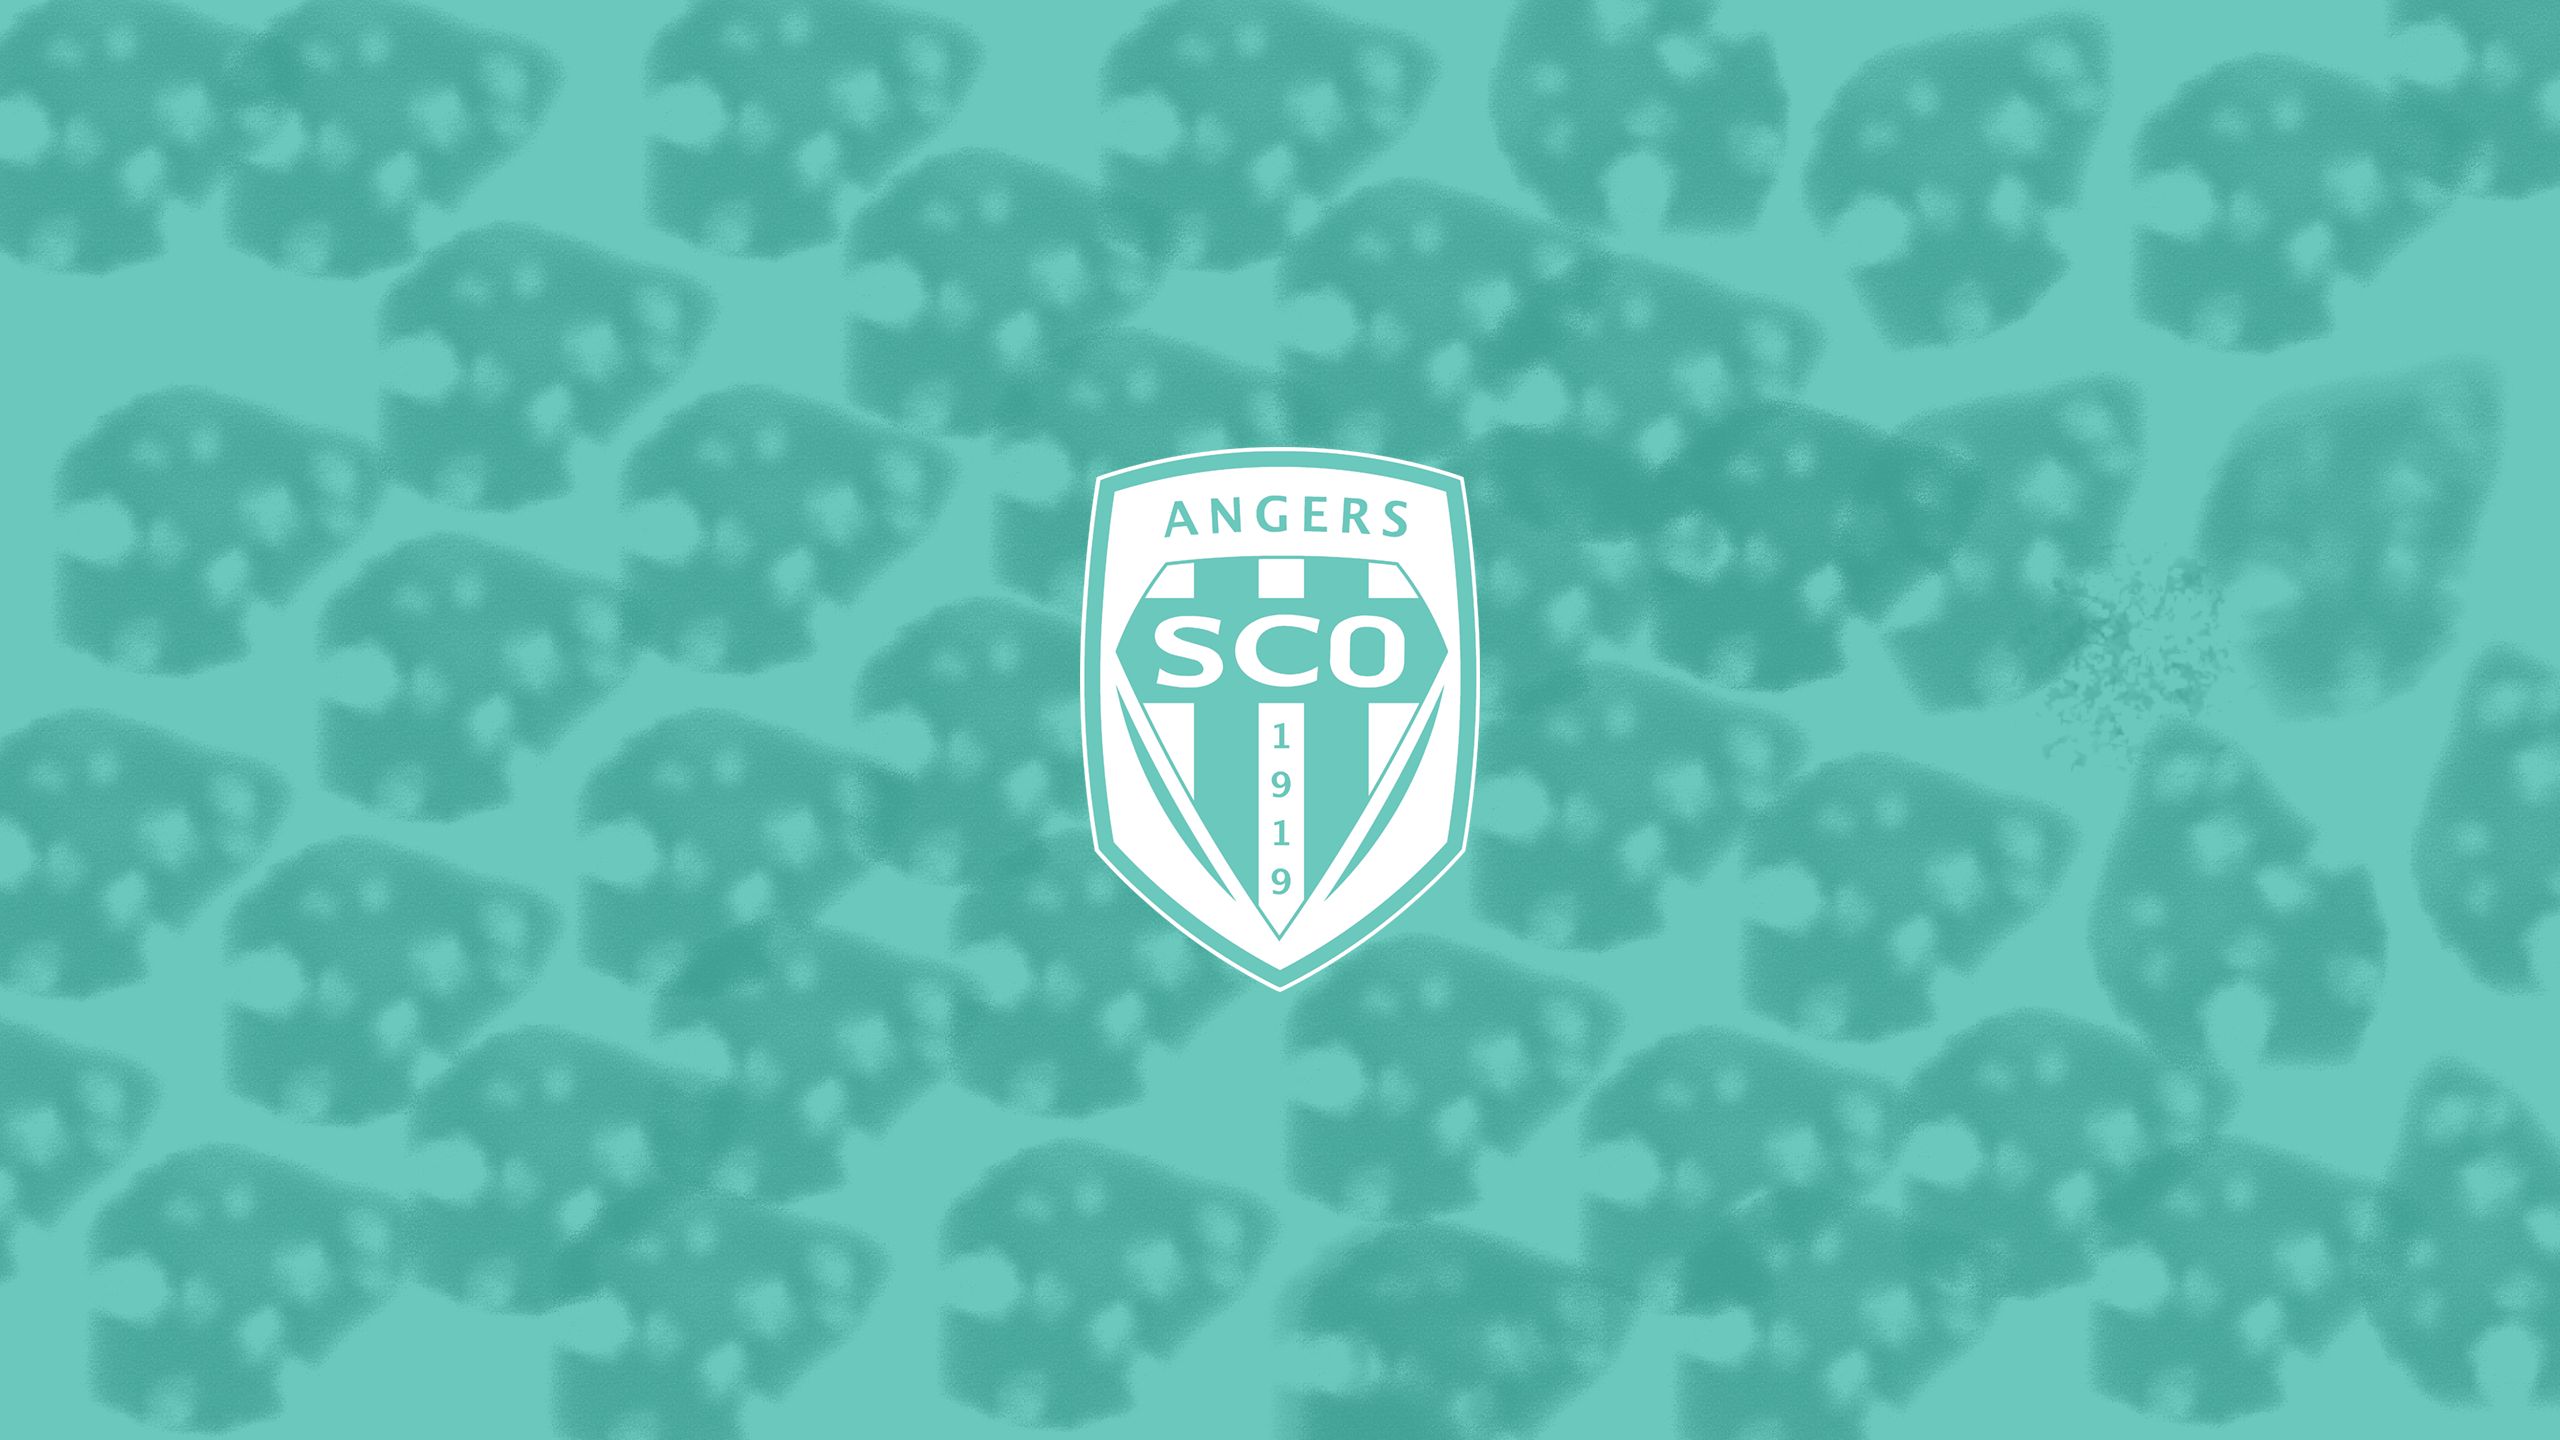 Free Angers Sco Wallpapers